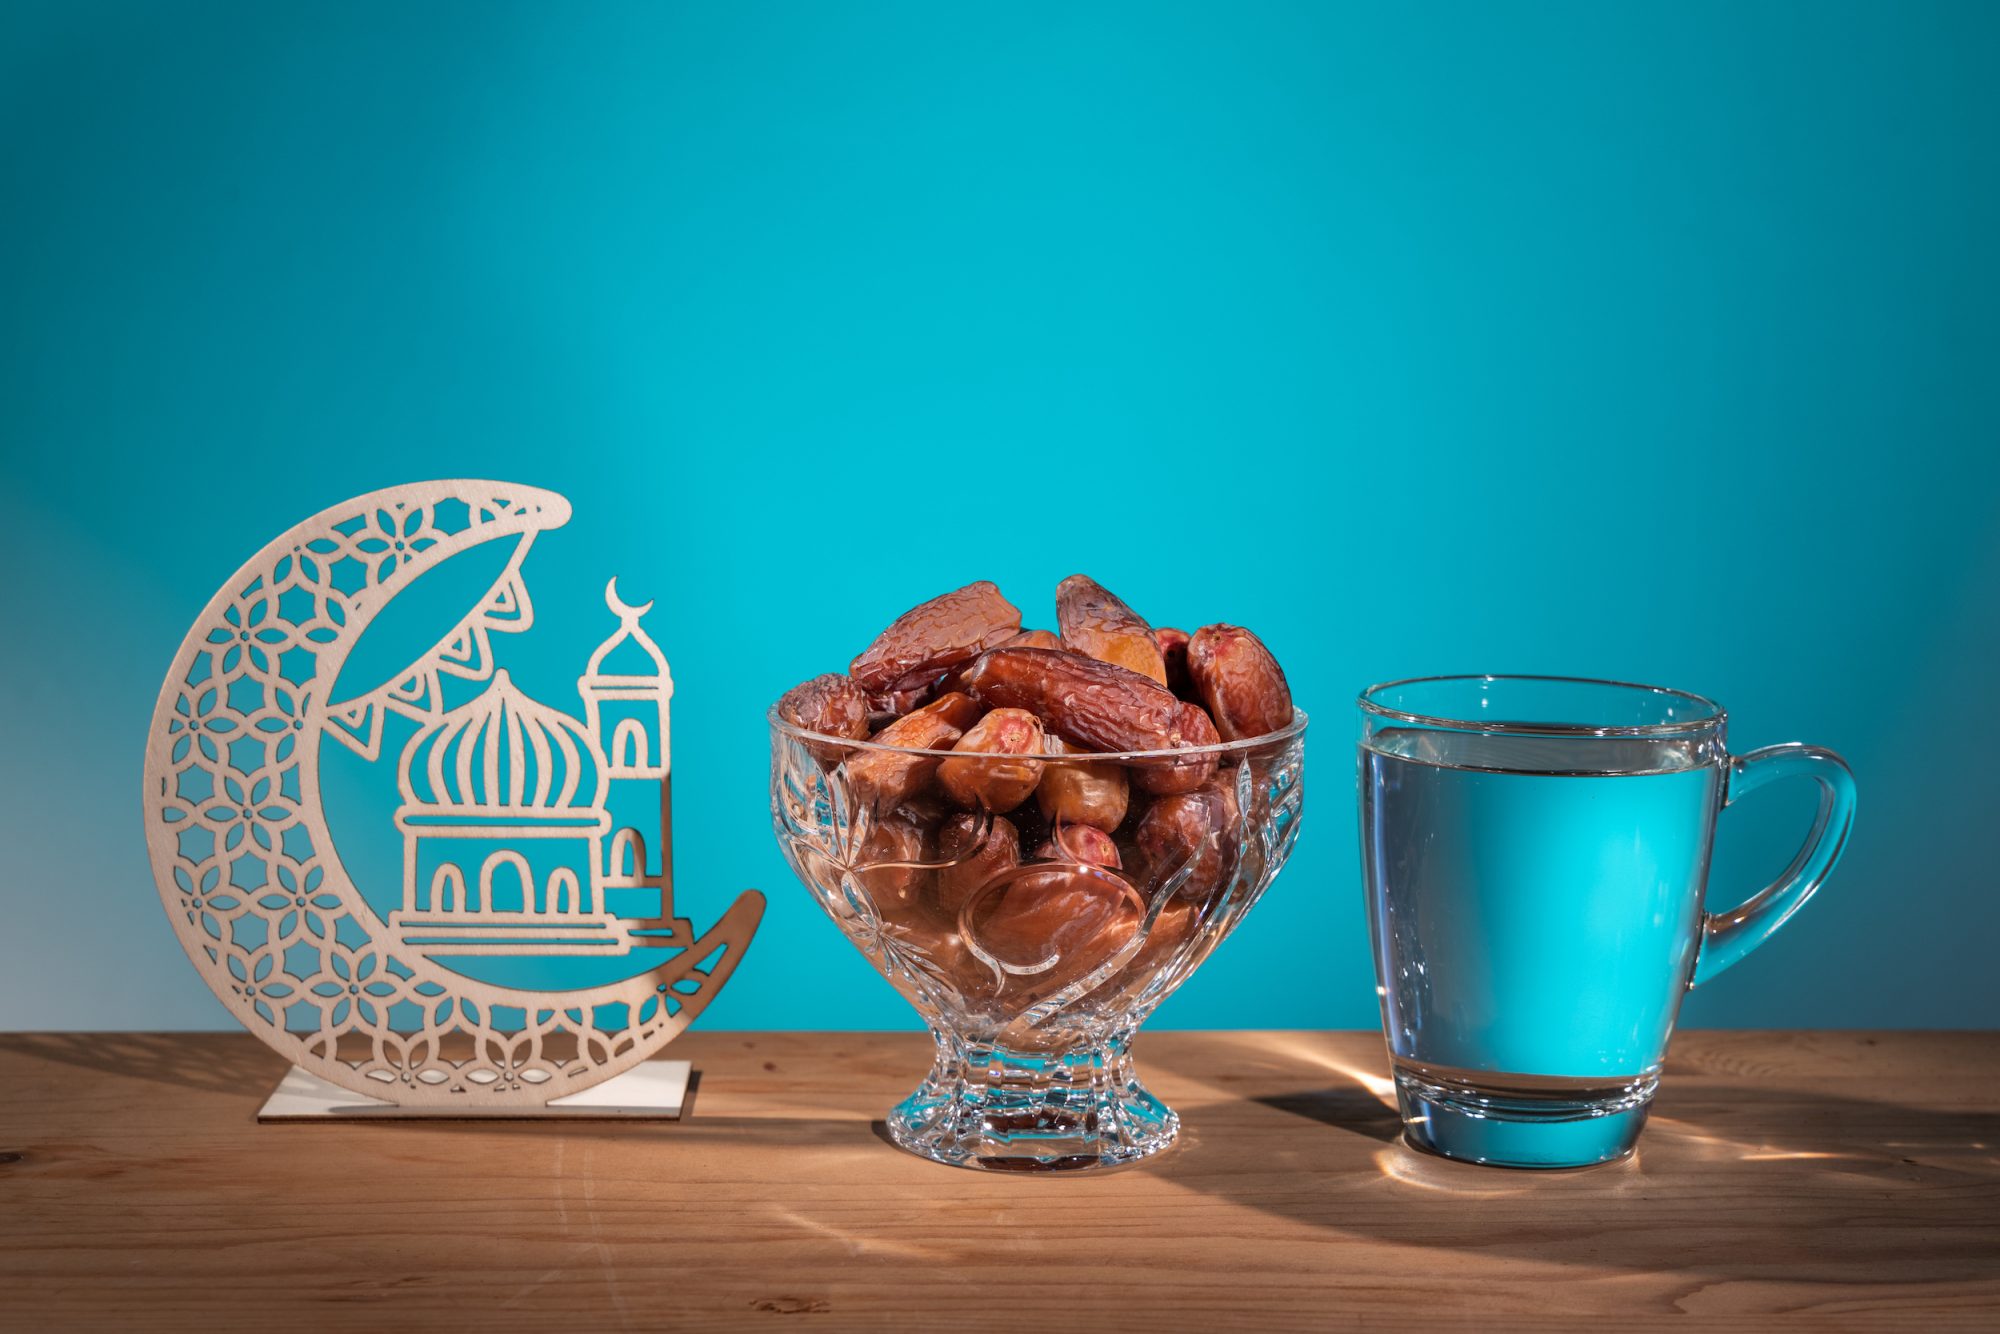 5 foods that cause thirst and should be avoided on Suhoor